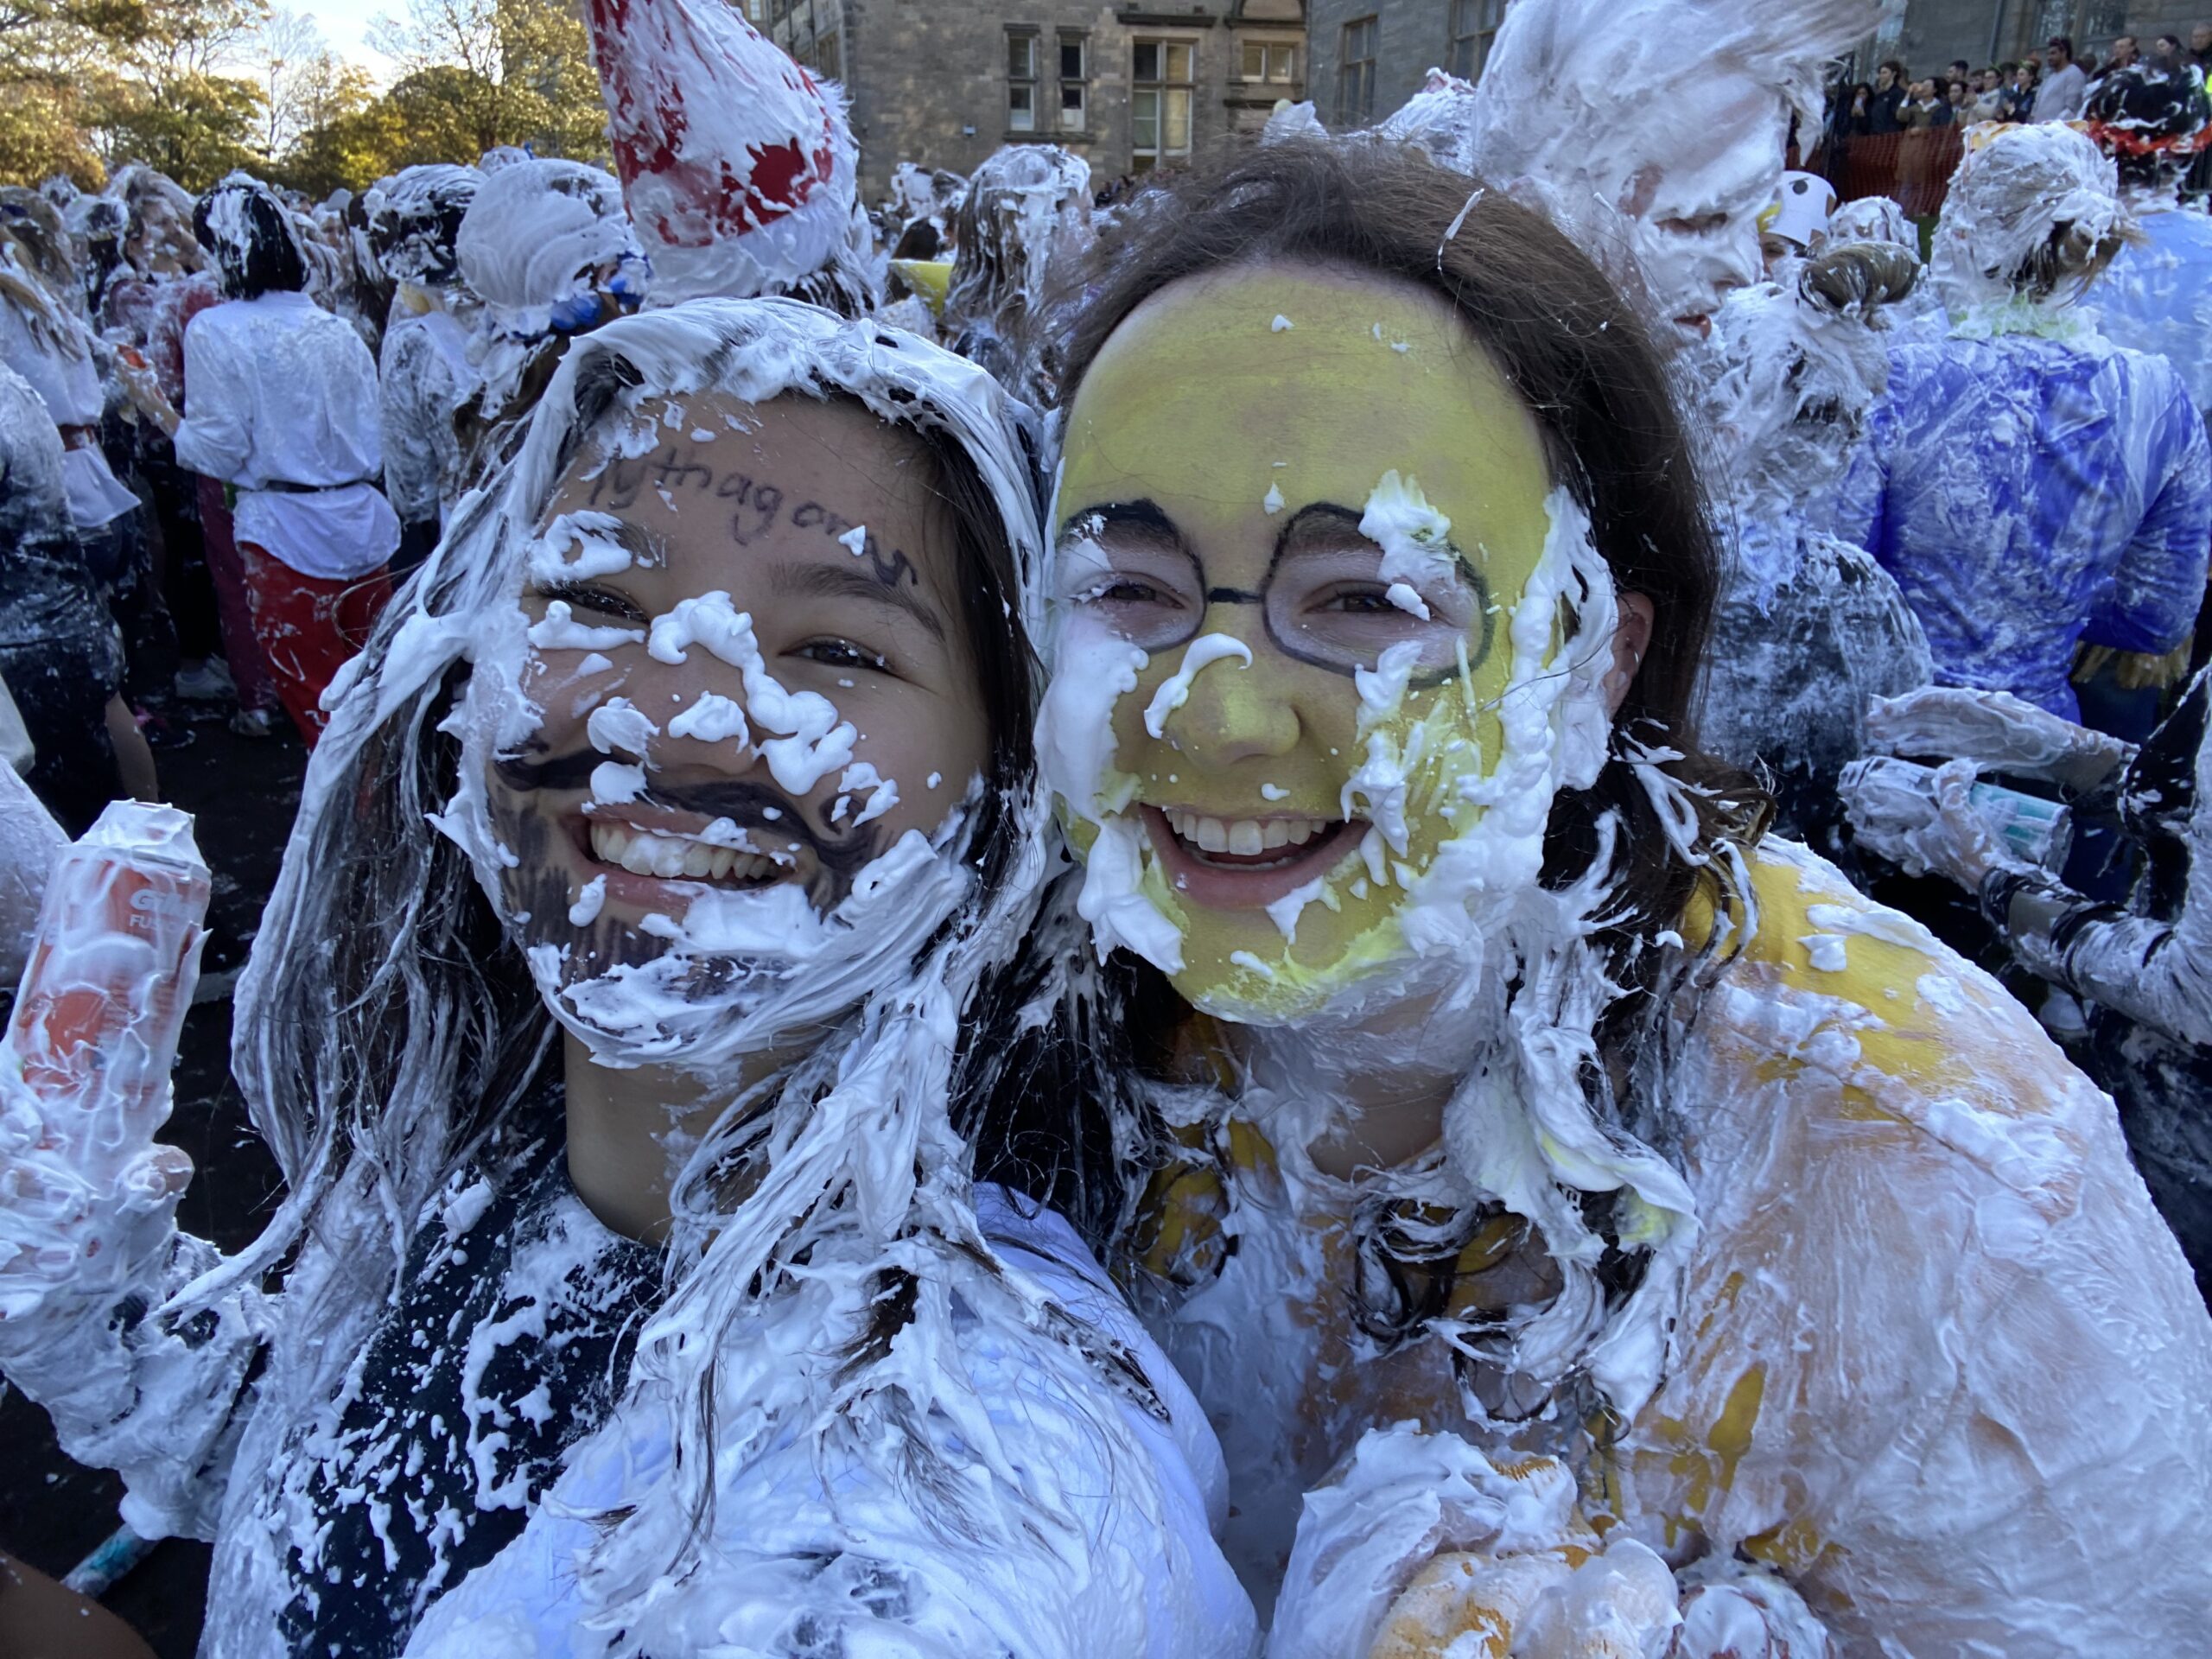 two girls covered in shaving cream dressed in costumes